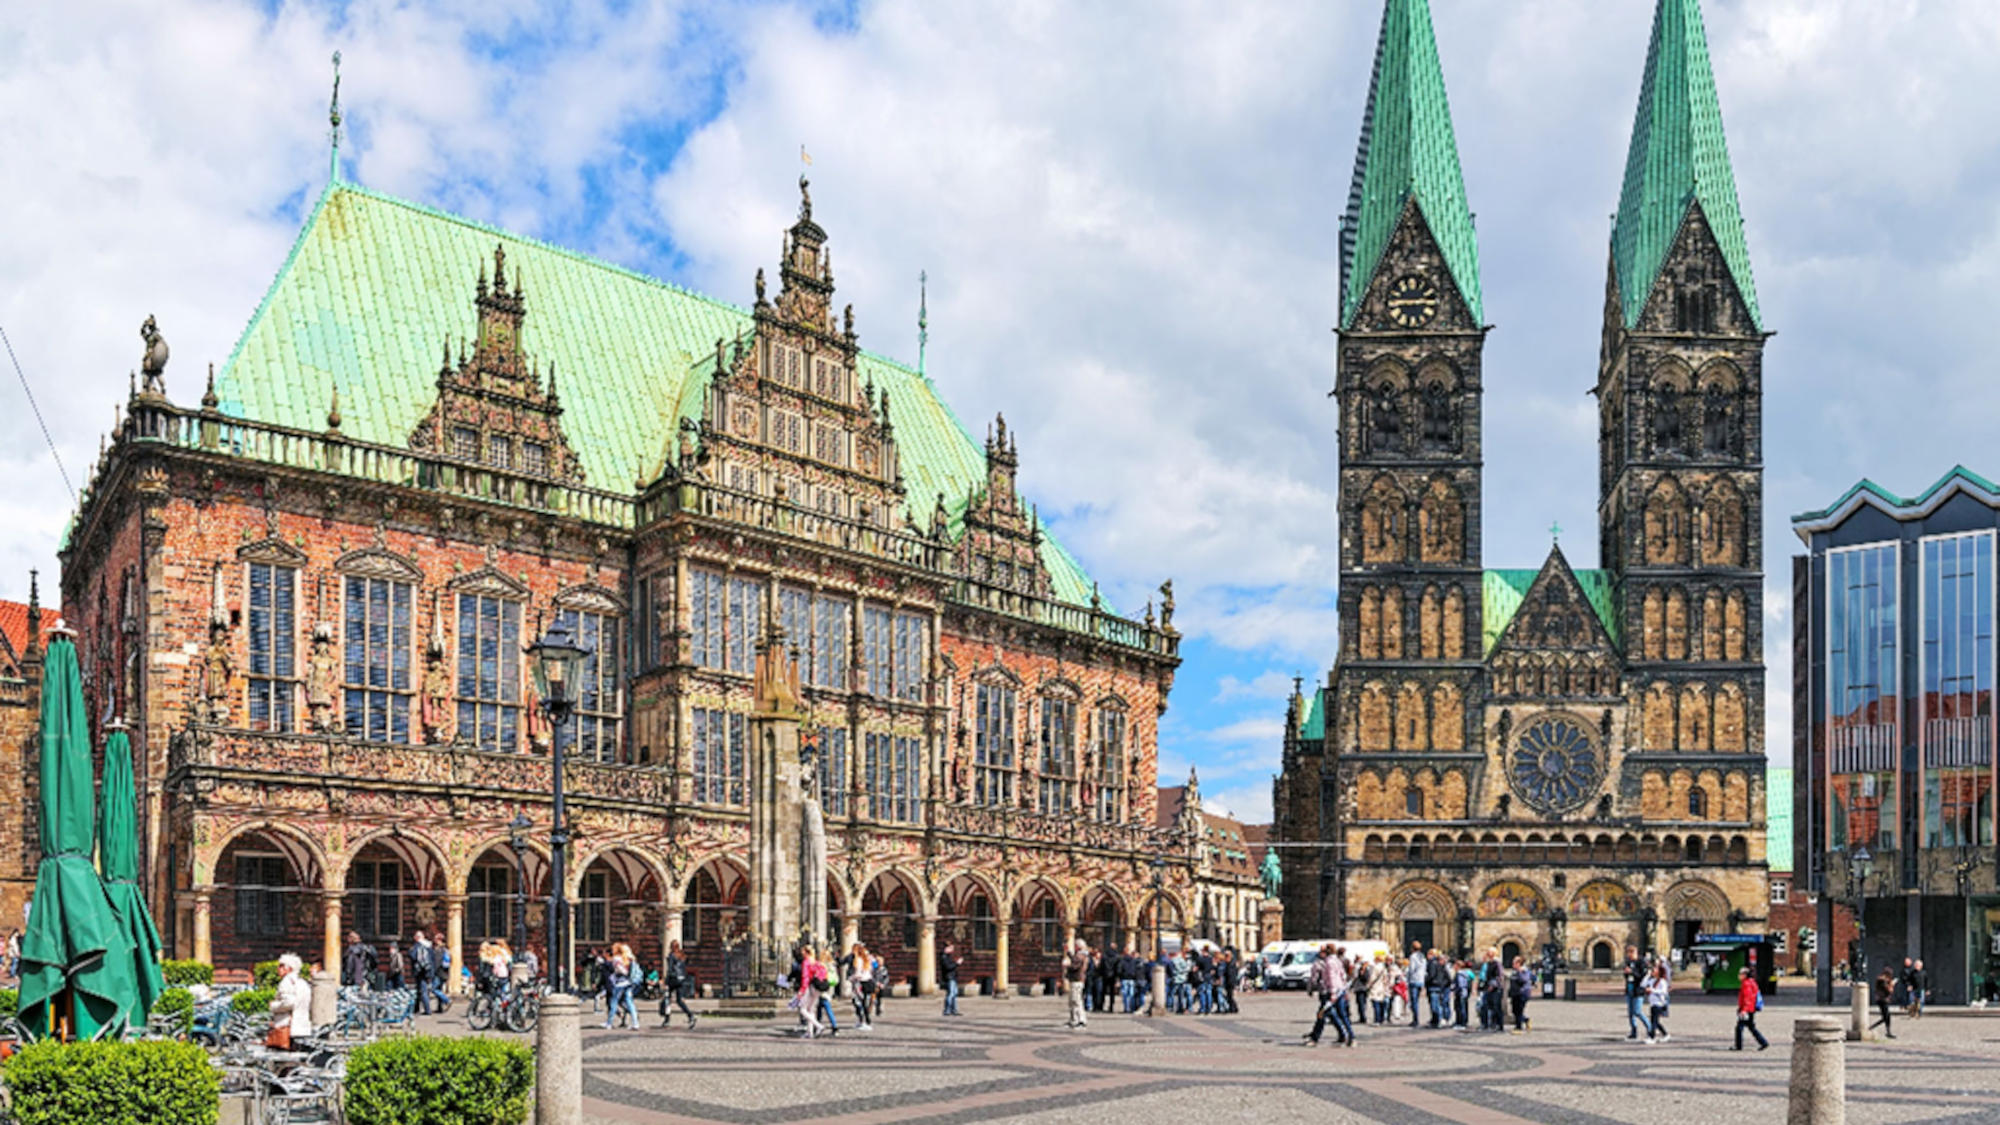 Bremen’s market square with Bremen Town Hall, Bremen Cathedral, and the Bremen Parliament